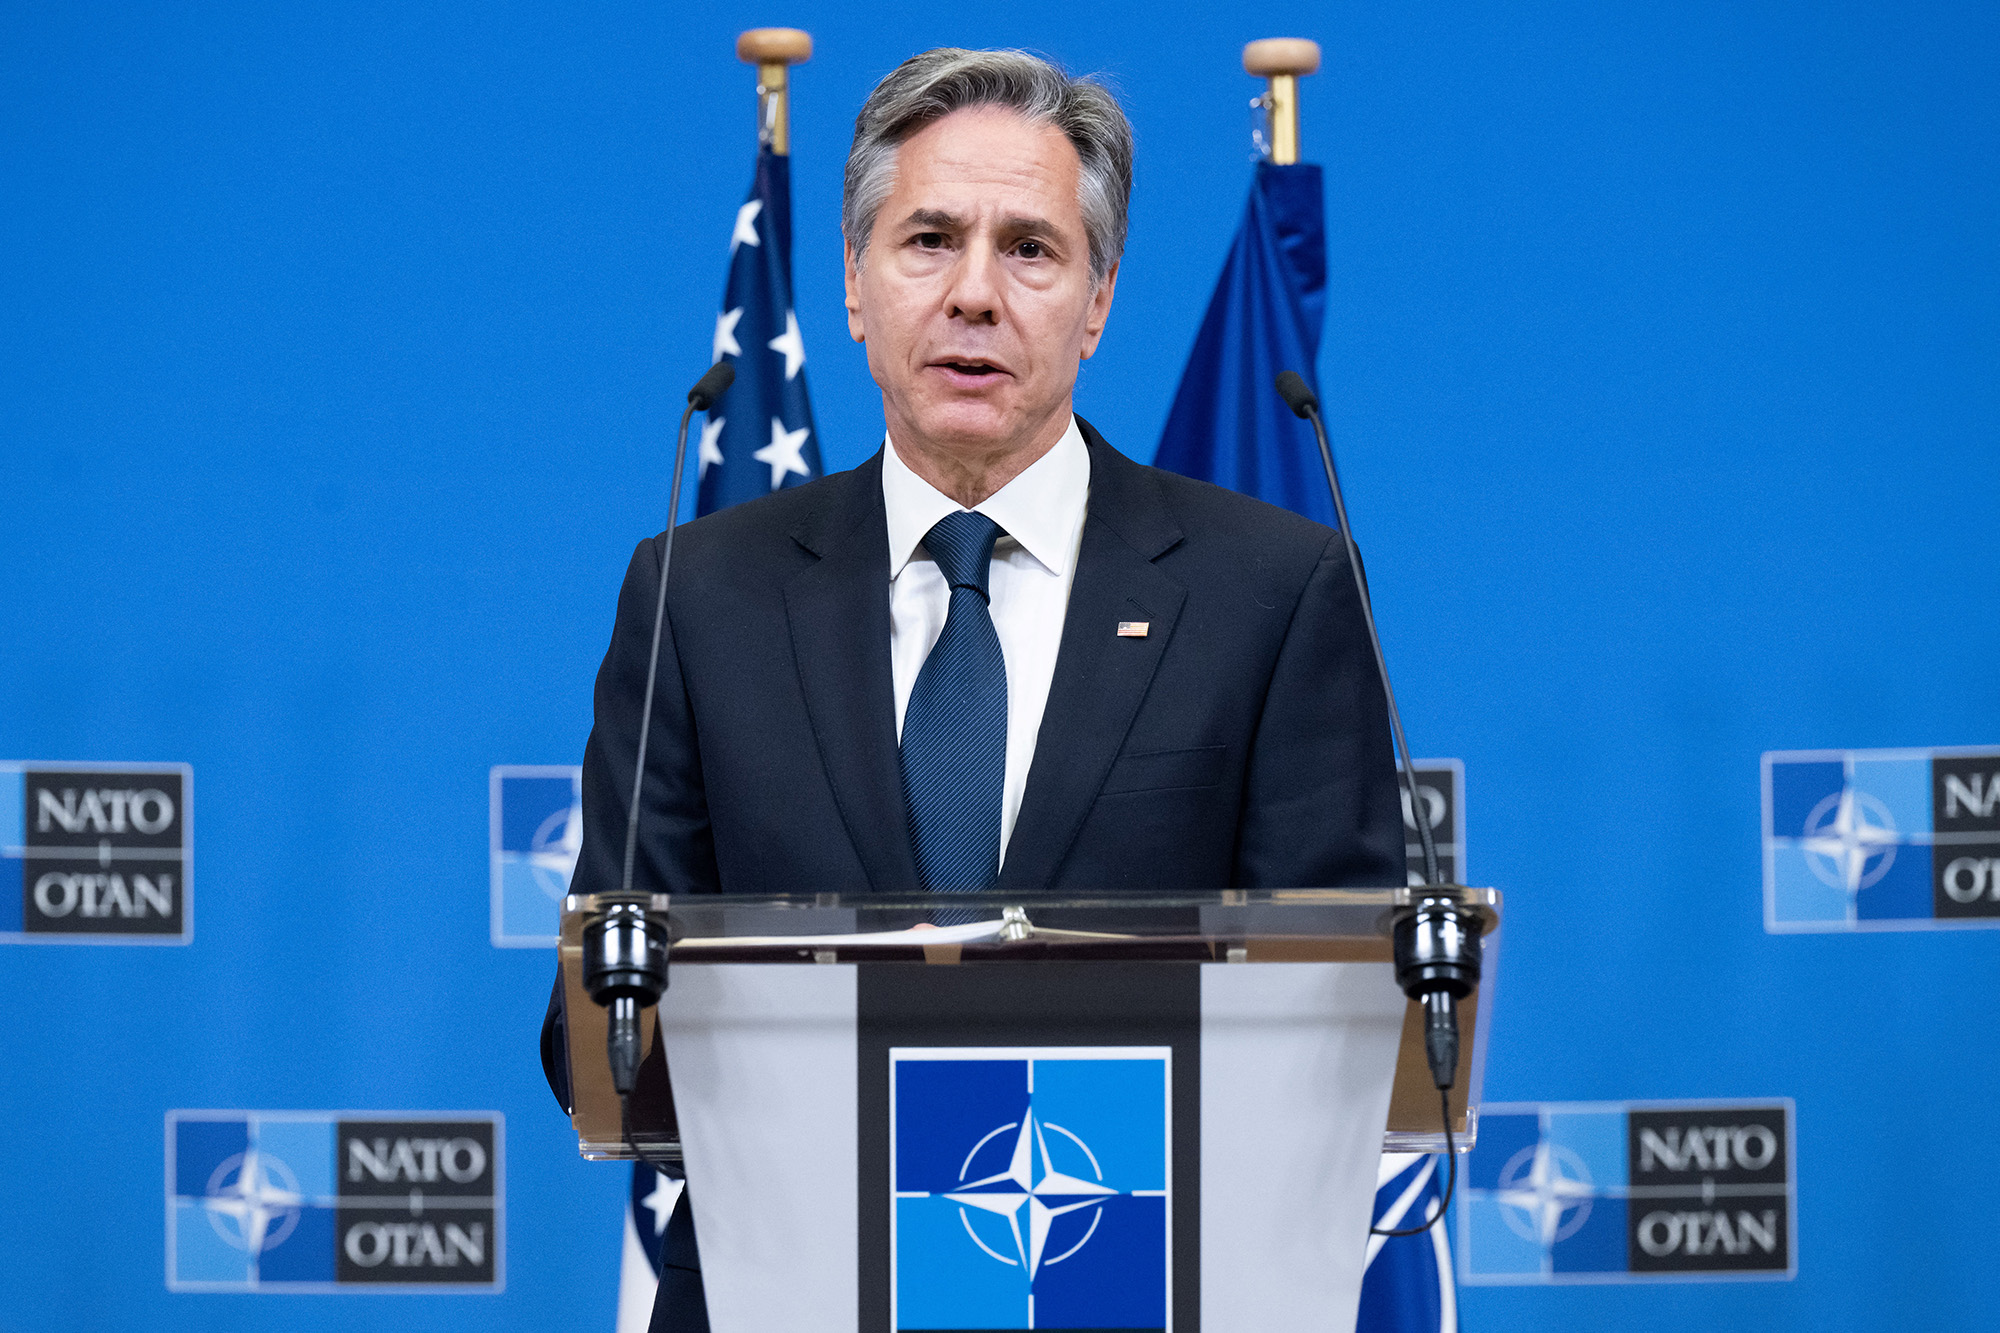 US Secretary of State Antony Blinken gives a press conference following the Nato Foreign Ministers meeting on Ukraine at Nato Headquarters in Brussels, Belgium, on November 29.